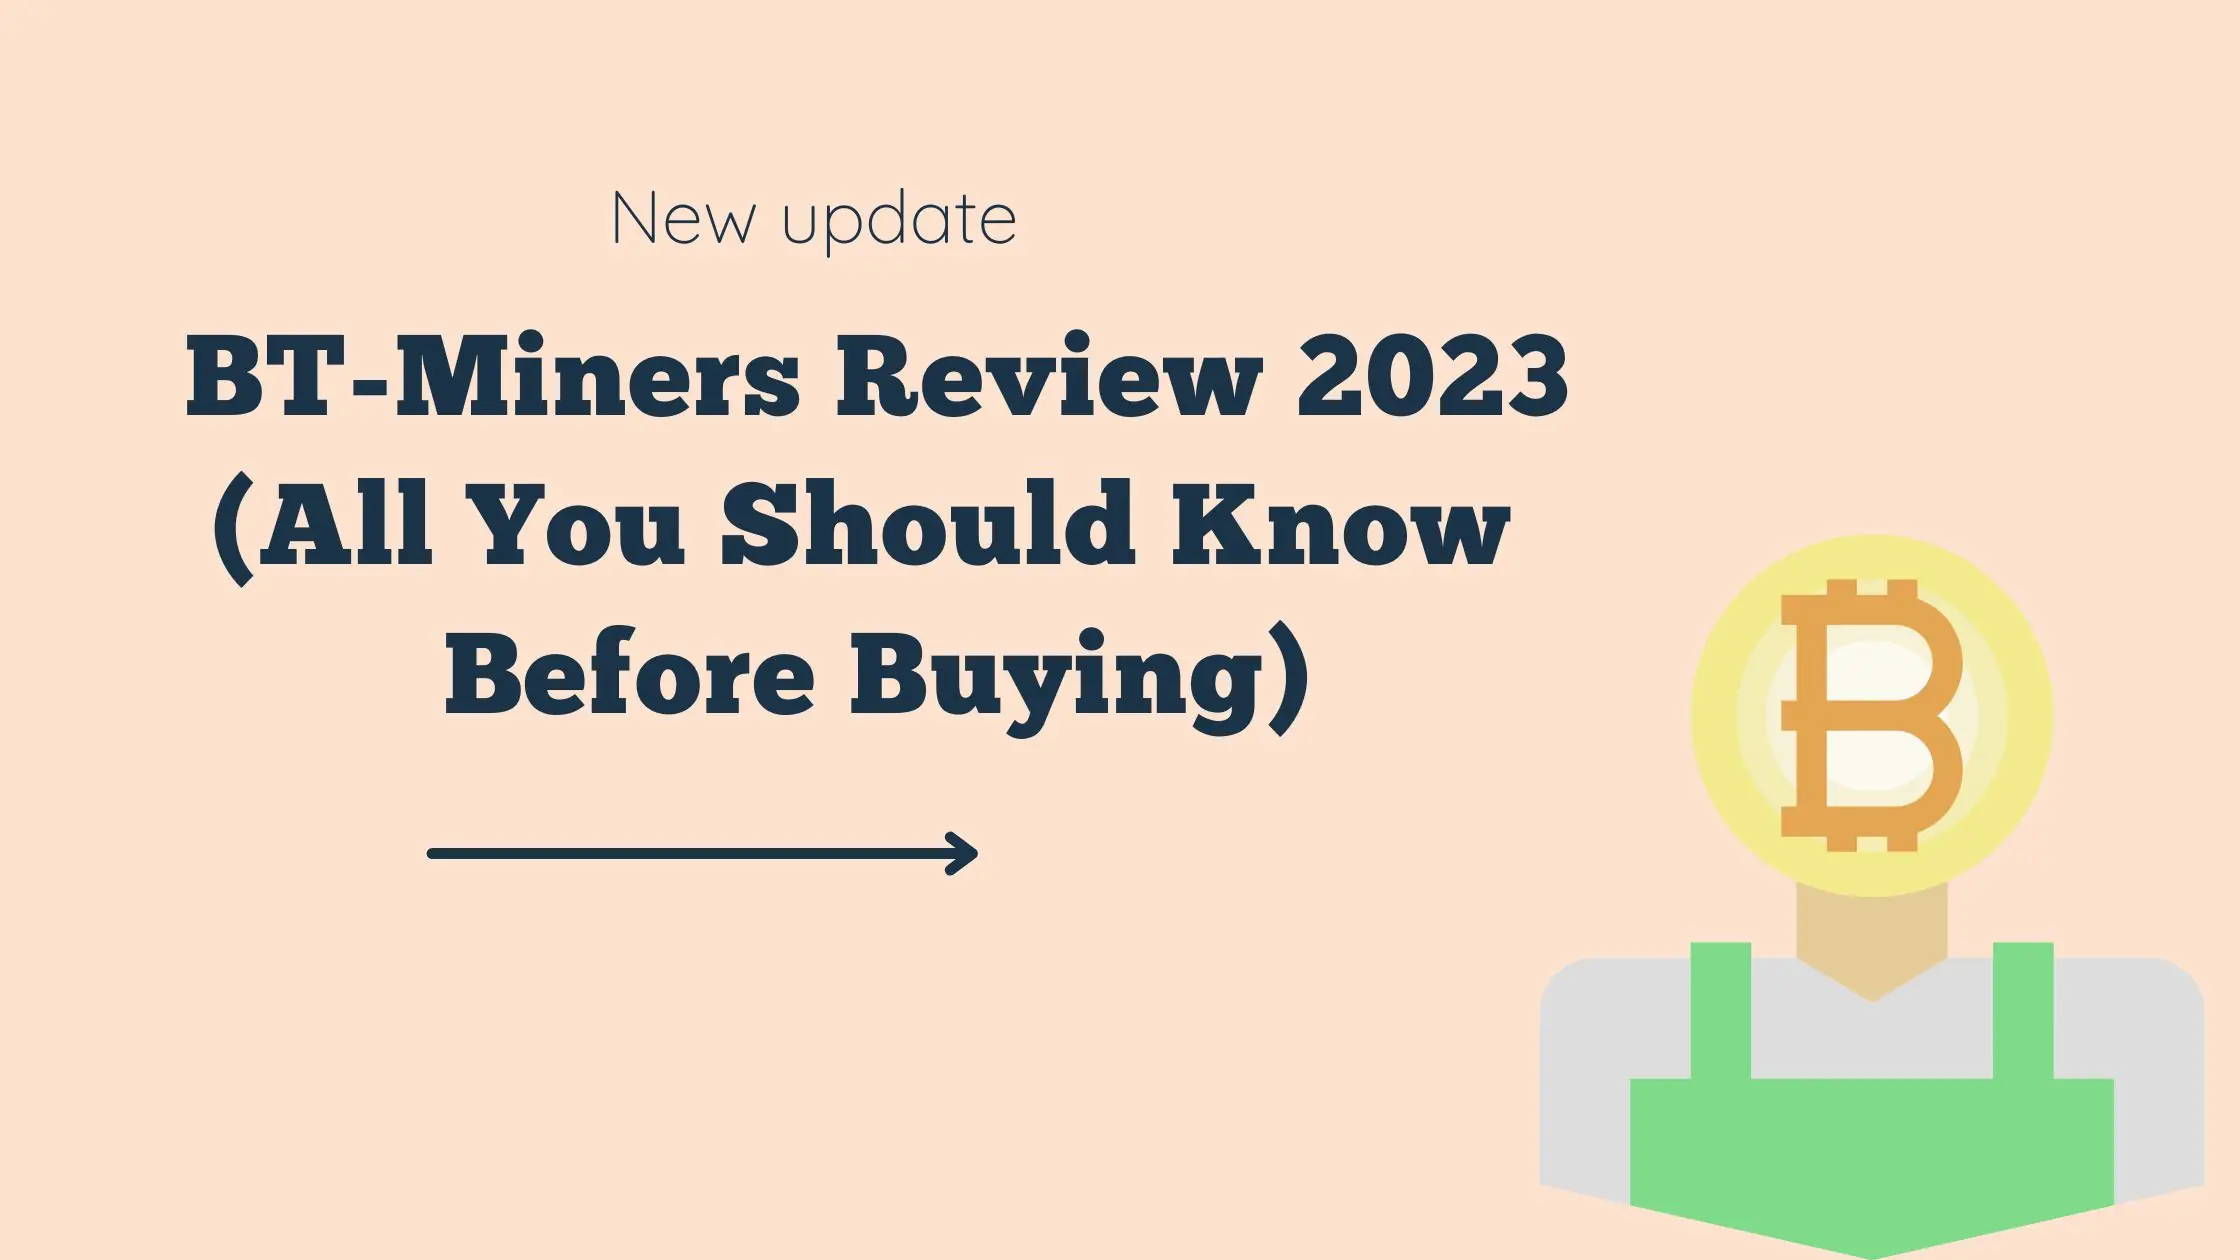 BT-Miners Review 2023 (All You Should Know Before Buying)